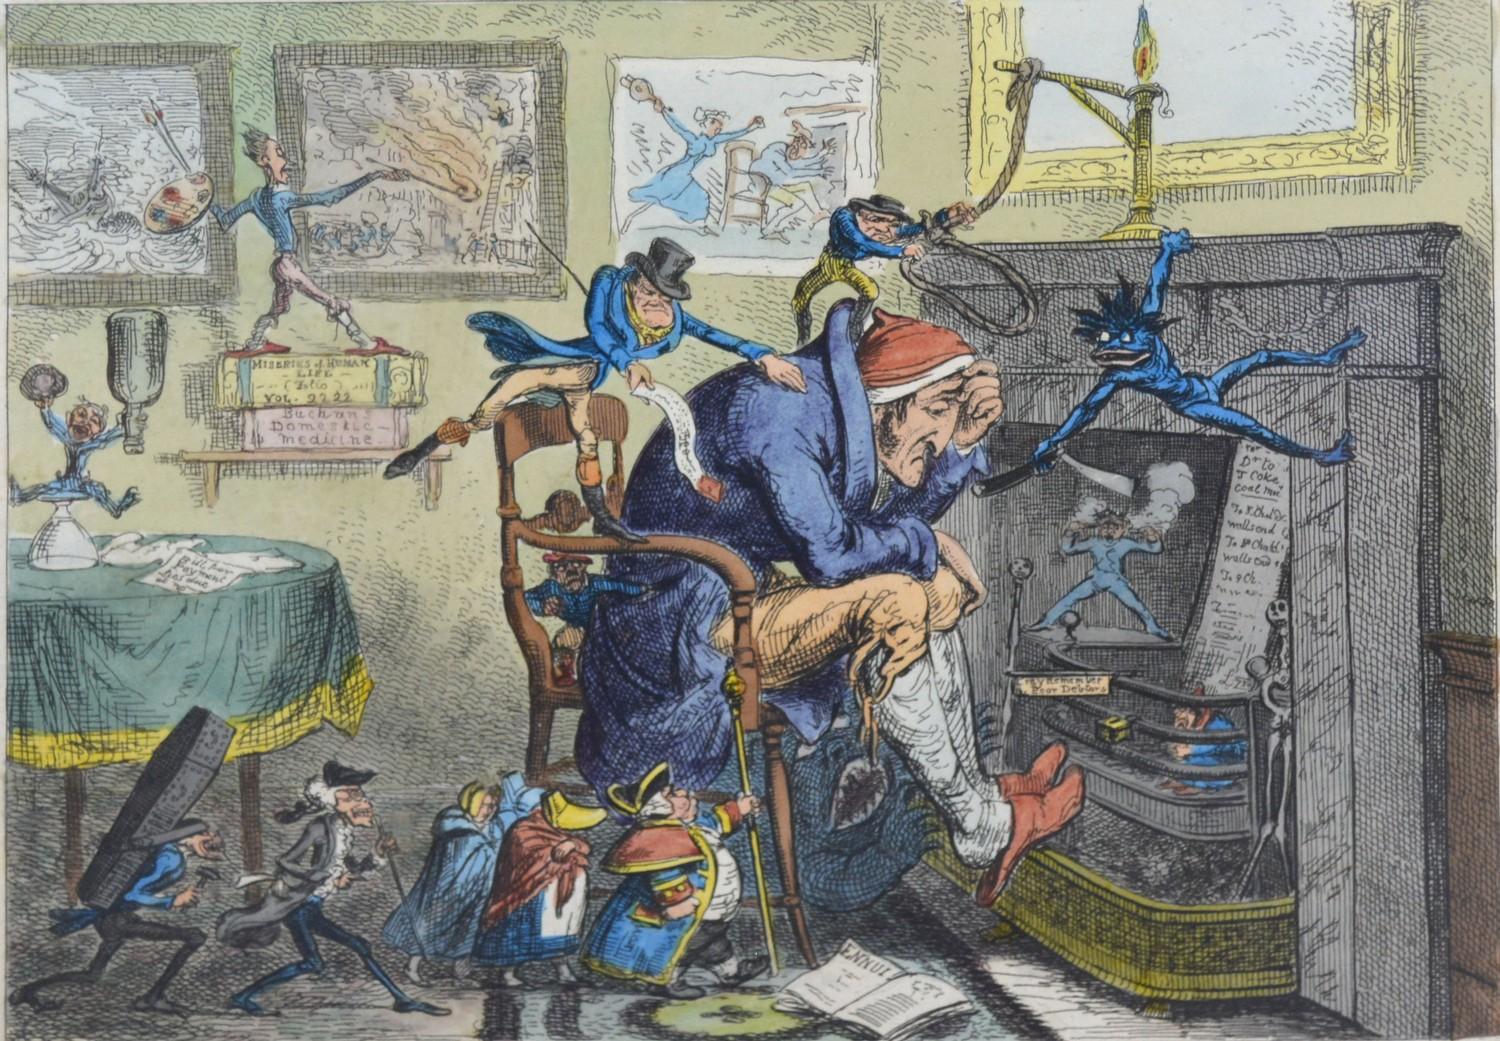 George Cruikshank 'The Blue Devils' published by G Humphrey, London 1823, coloured engraving, 21 x